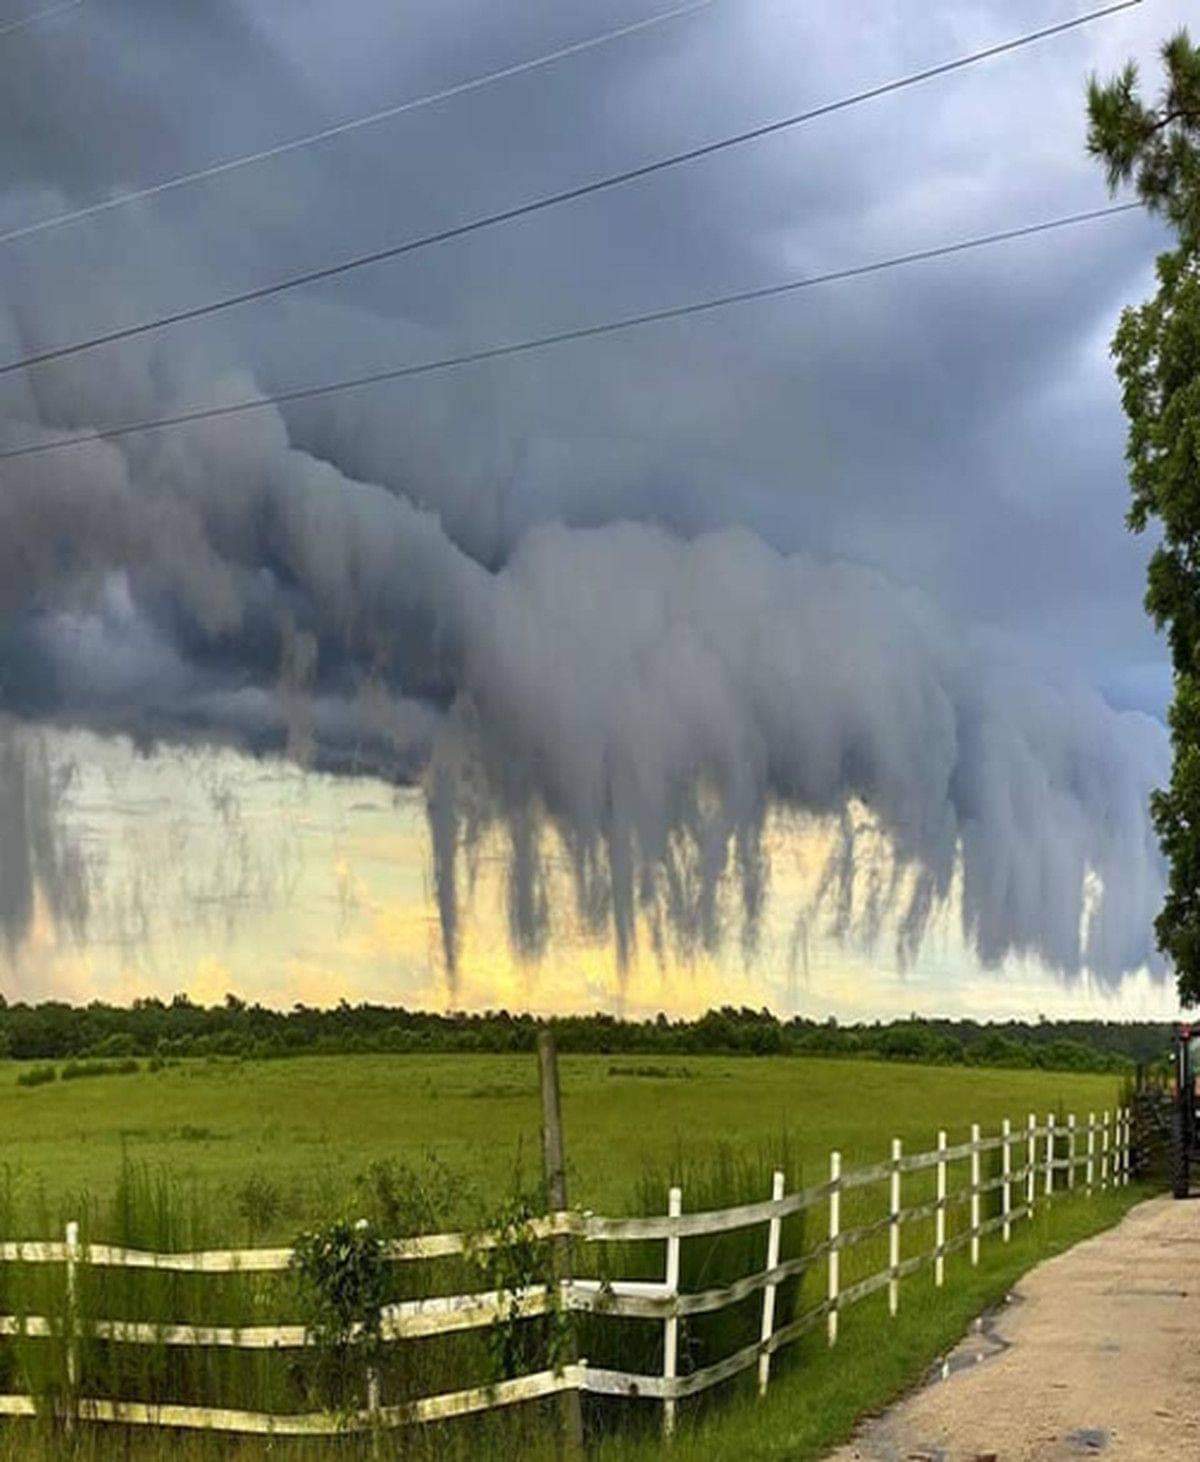 These are called Scud clouds. This was recently captured in South Carolina.